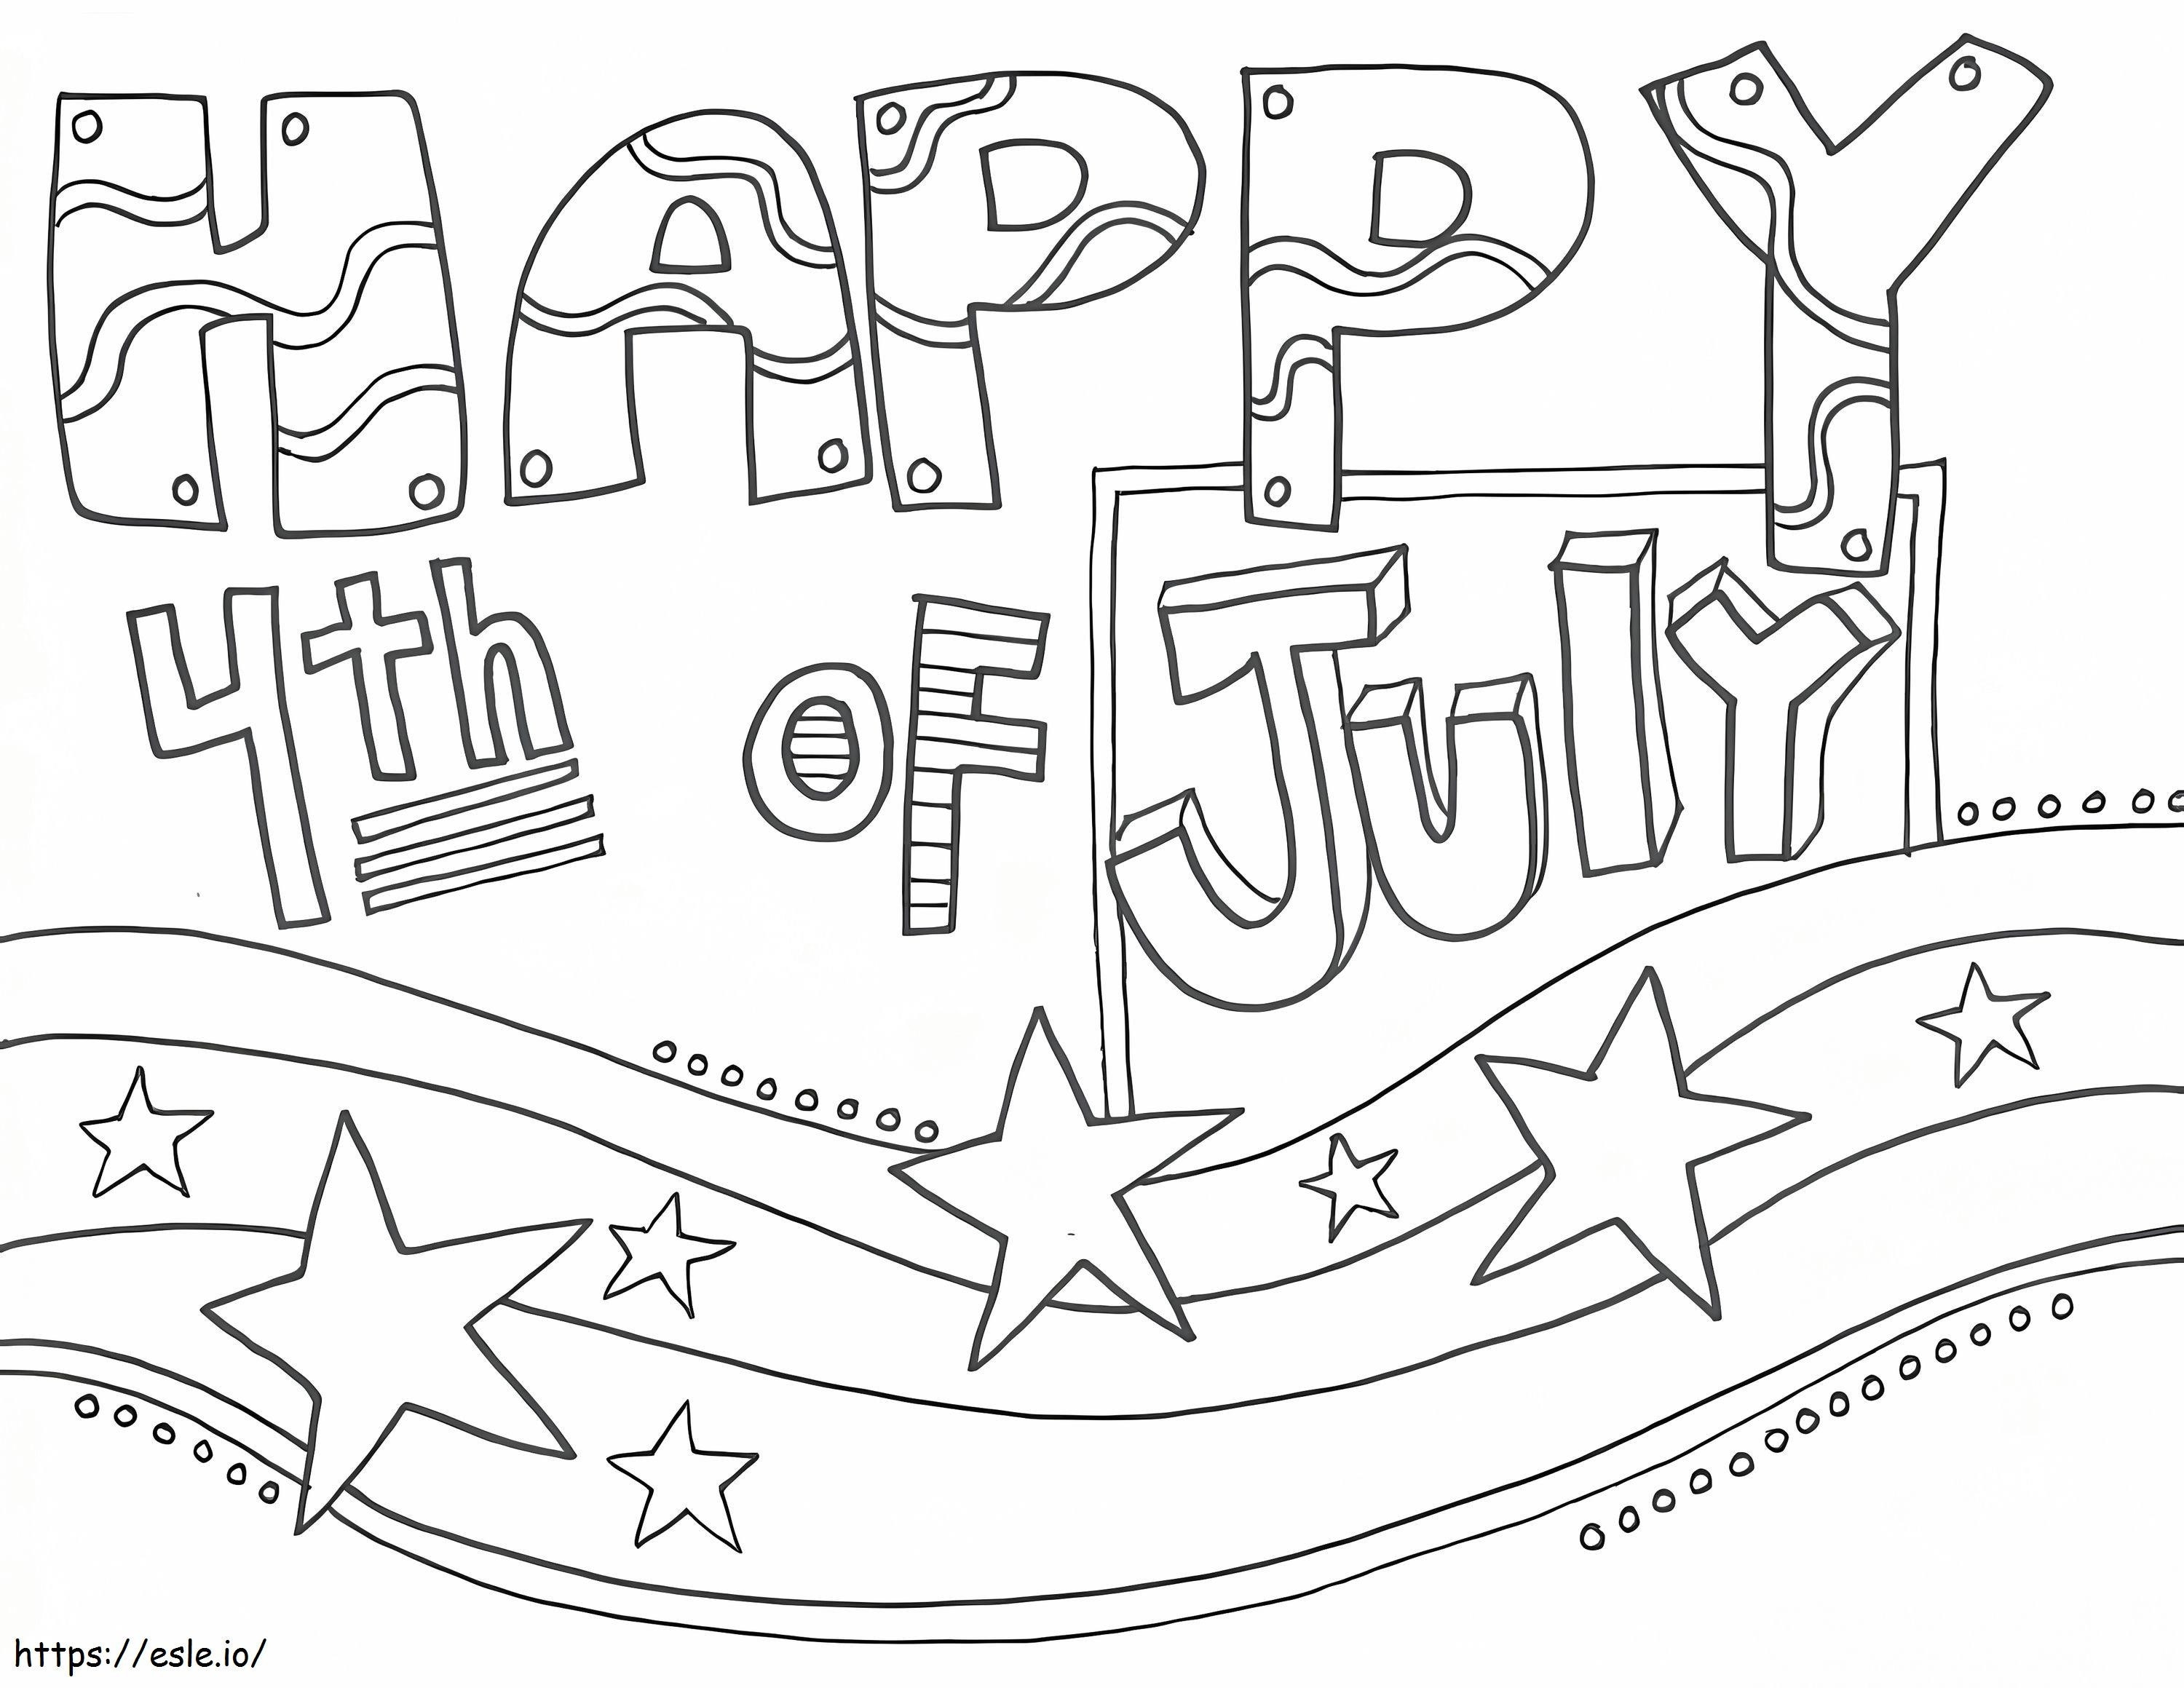 American Independence Day coloring page